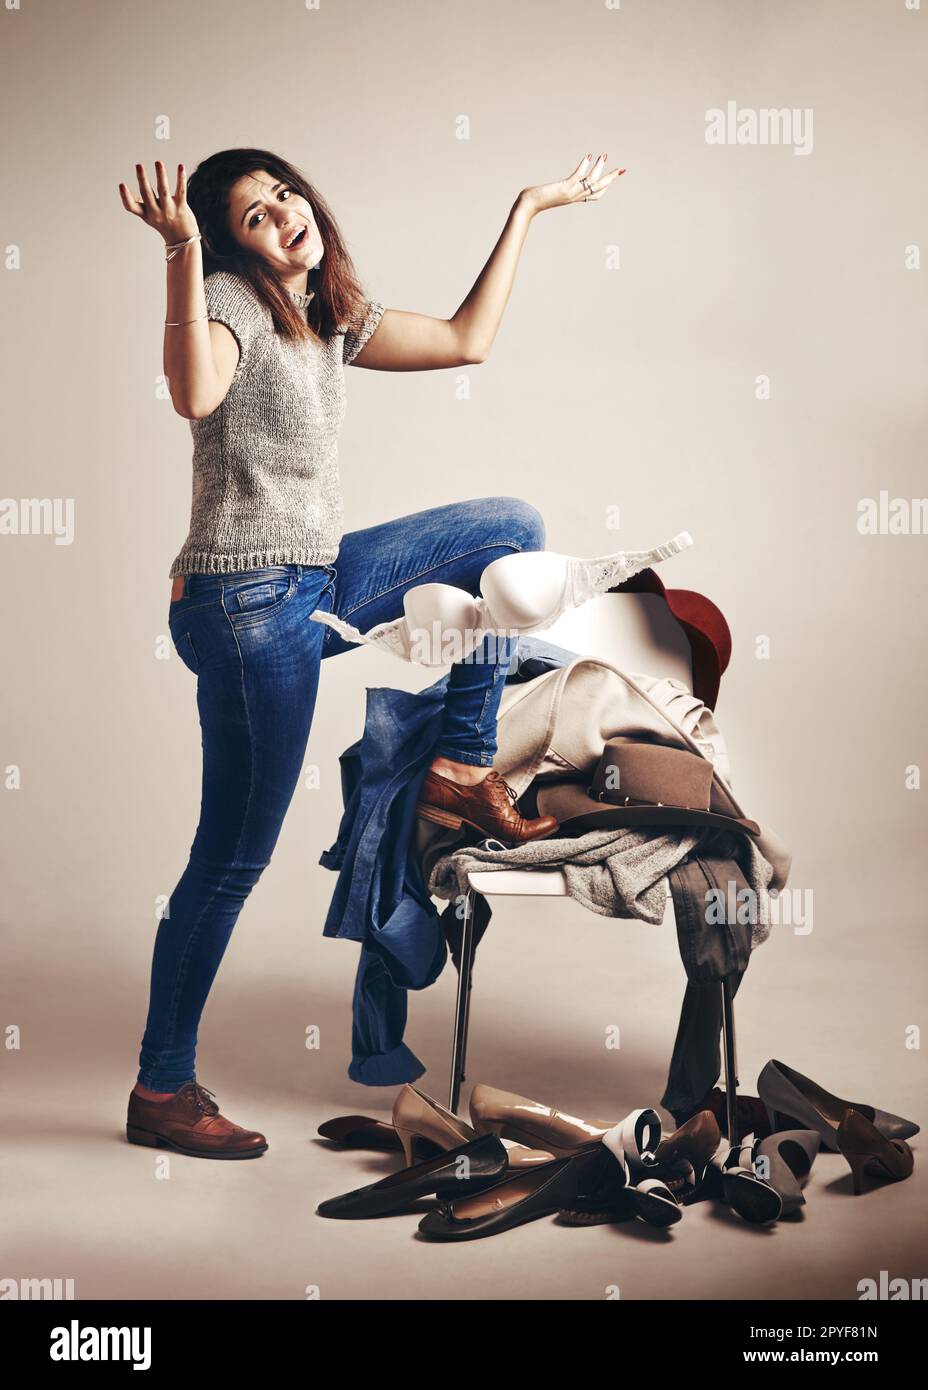 All these clothes and still nothing to wear. Studio shot of a young woman choosing clothing piled on a chair against a brown background. Stock Photo